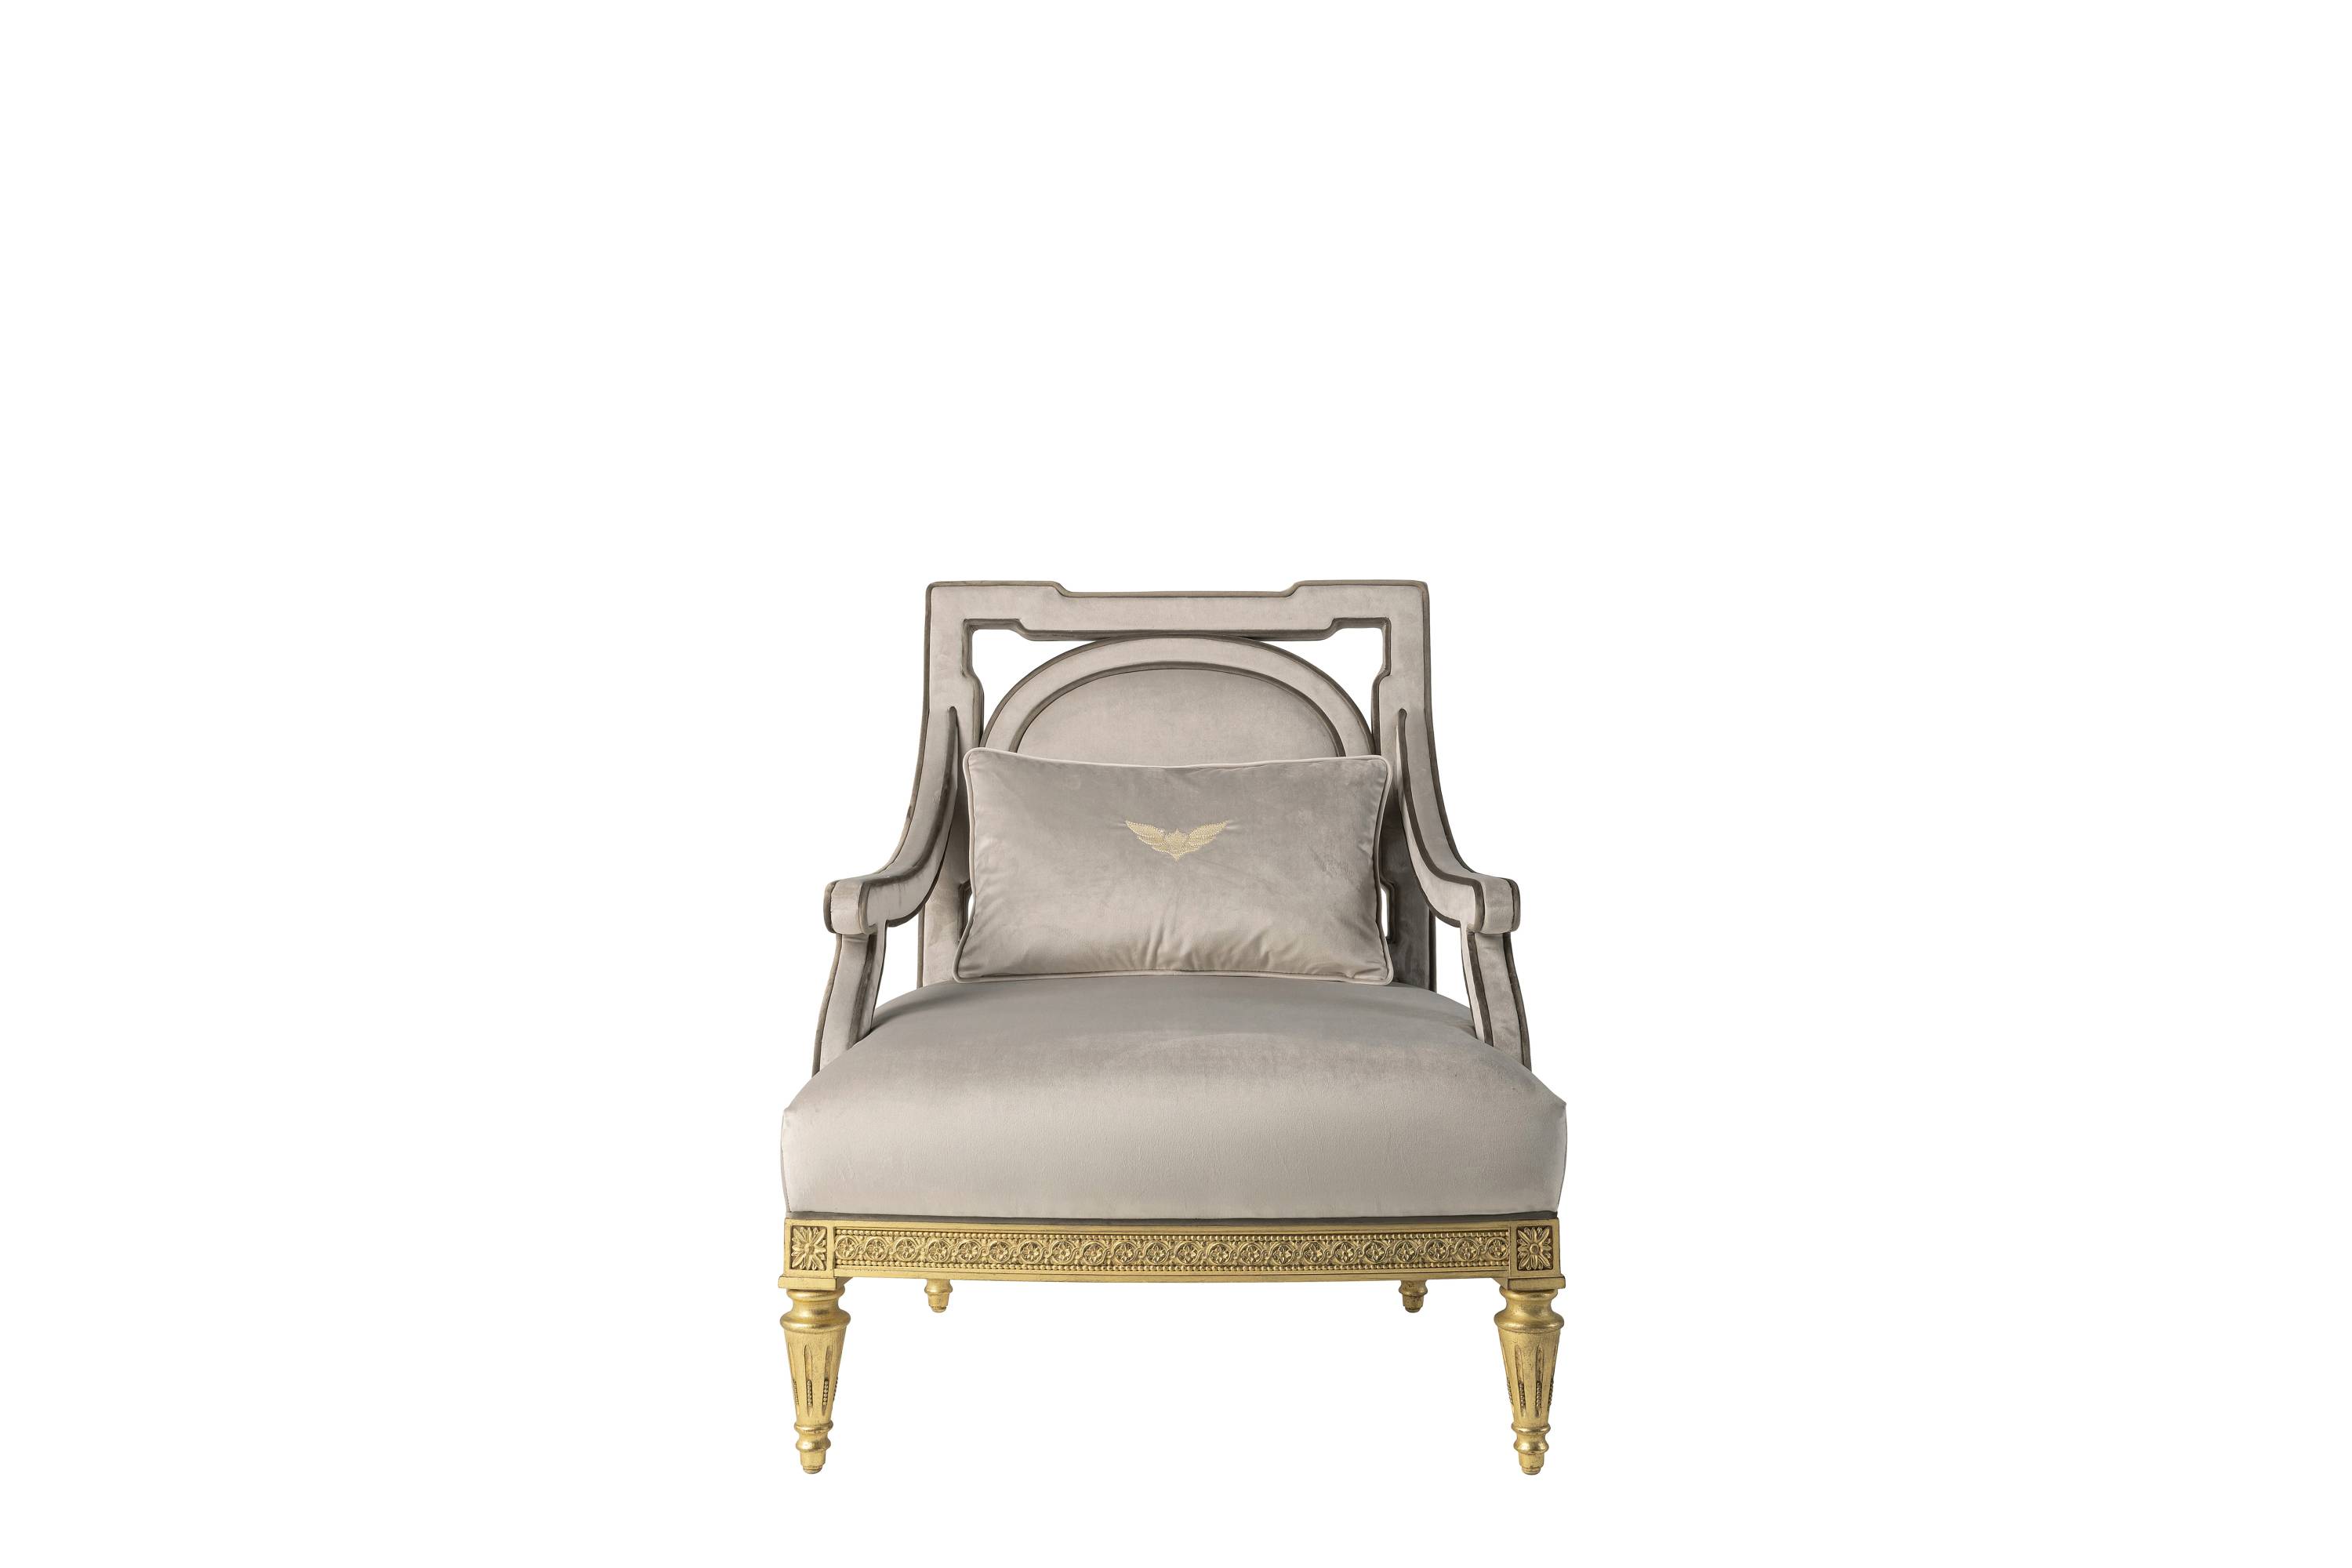 SATIN armchair - Bespoke projects with luxury Made in Italy classic furniture